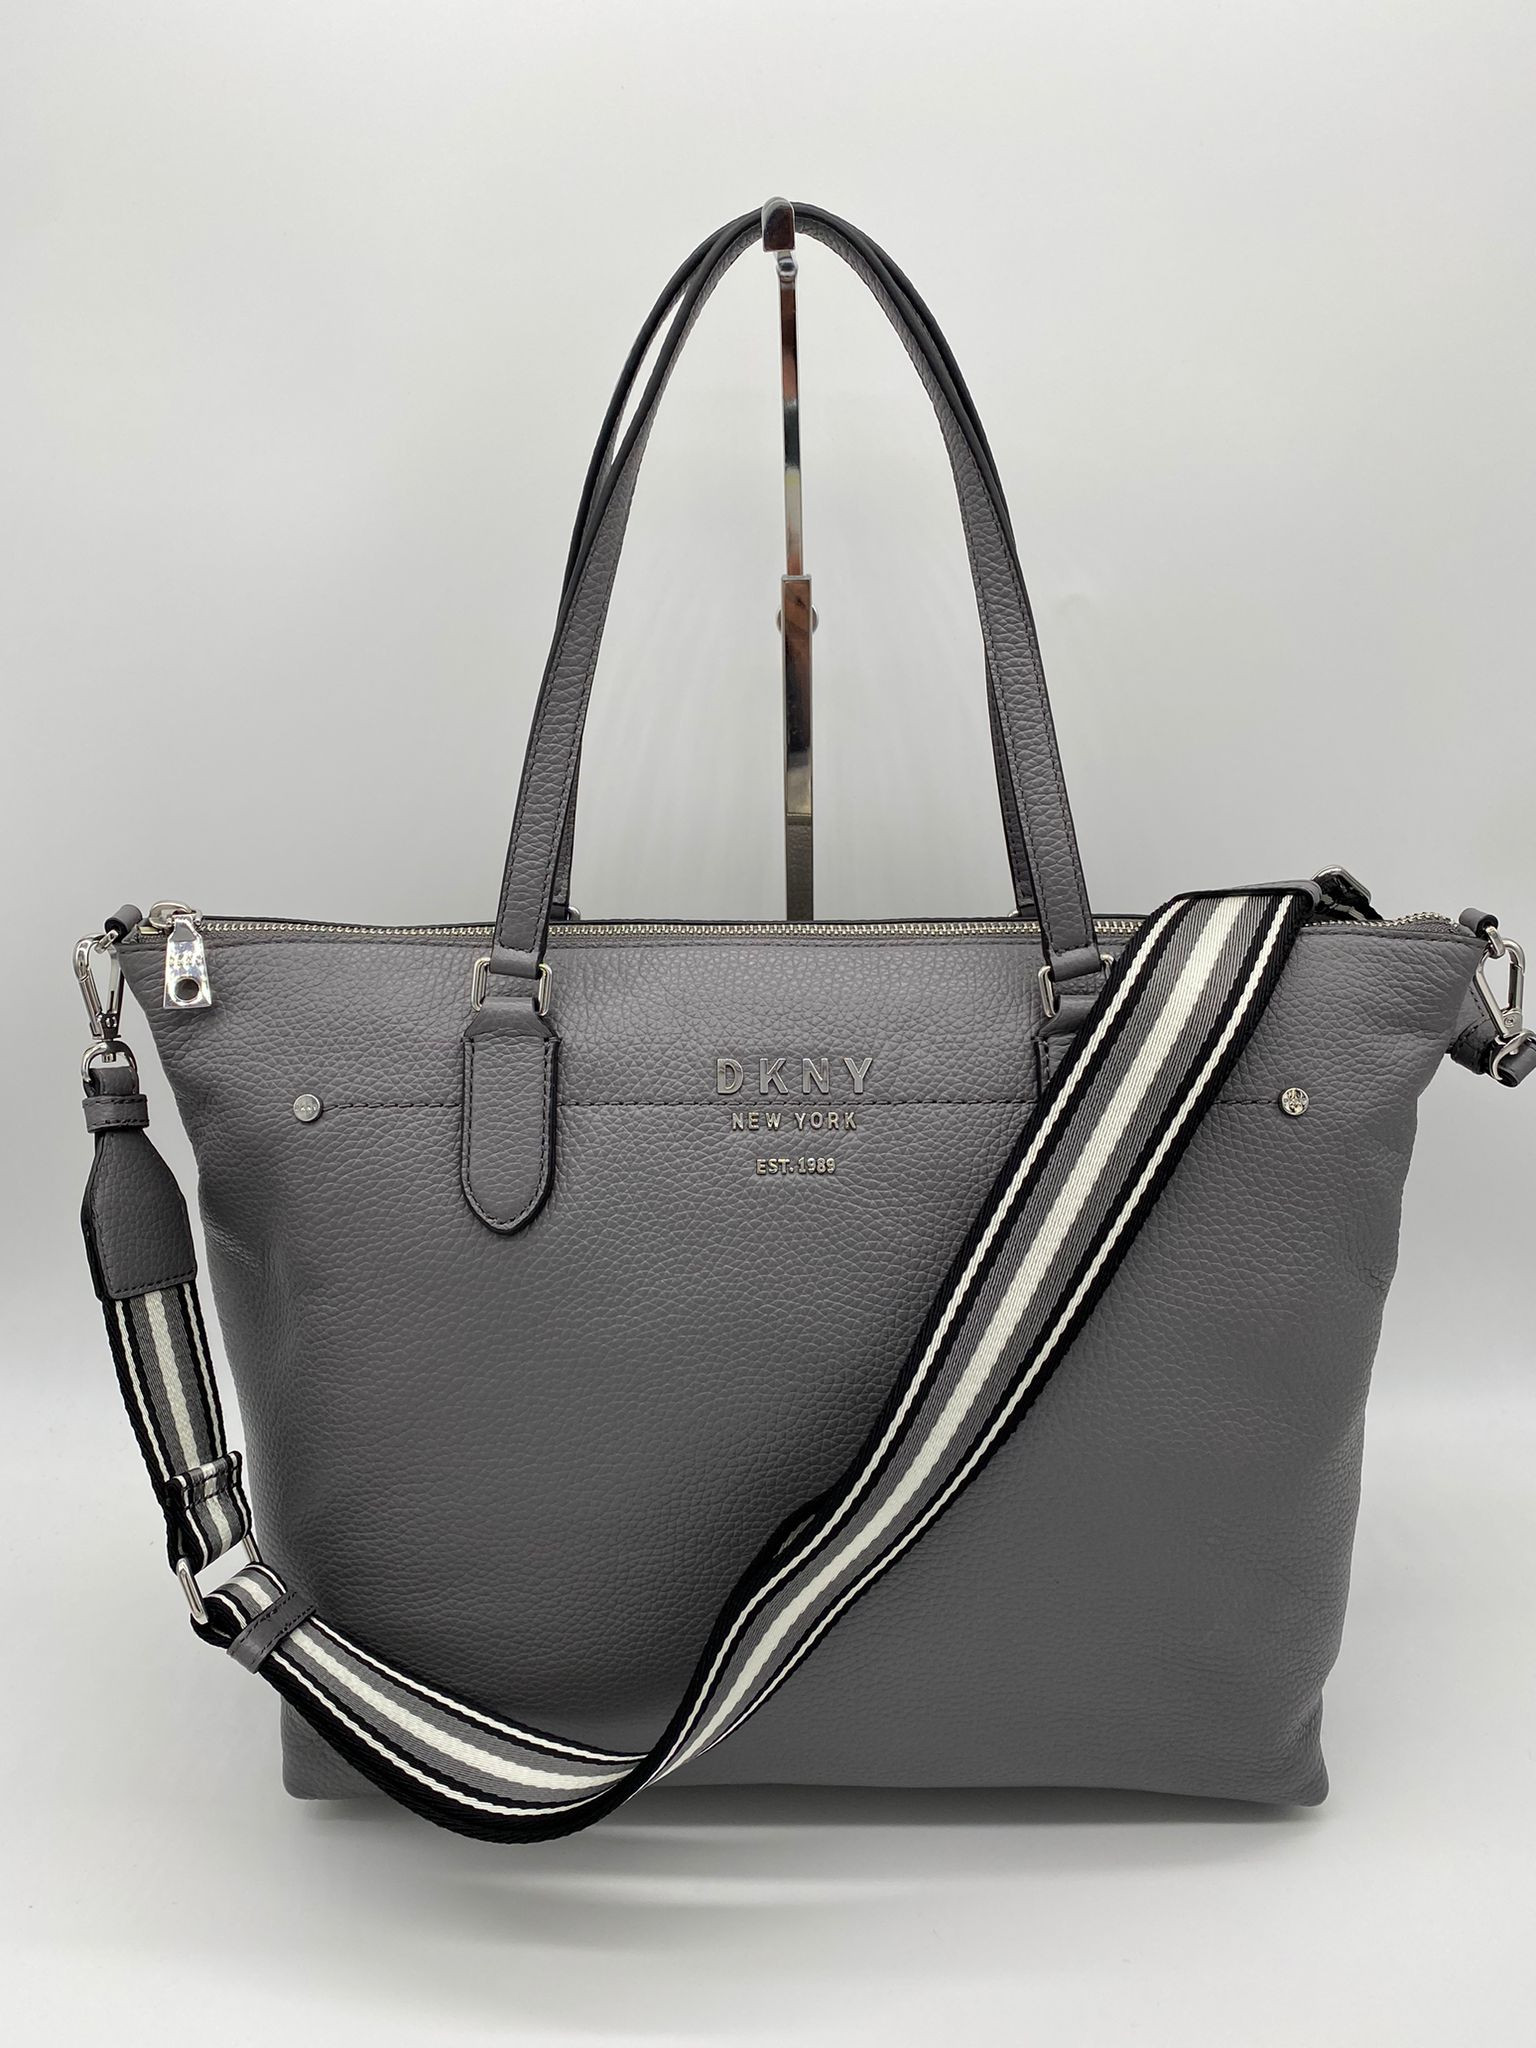 DKNY THOMPSON TOTE WITH LONG STRAP - GREY - LARGE